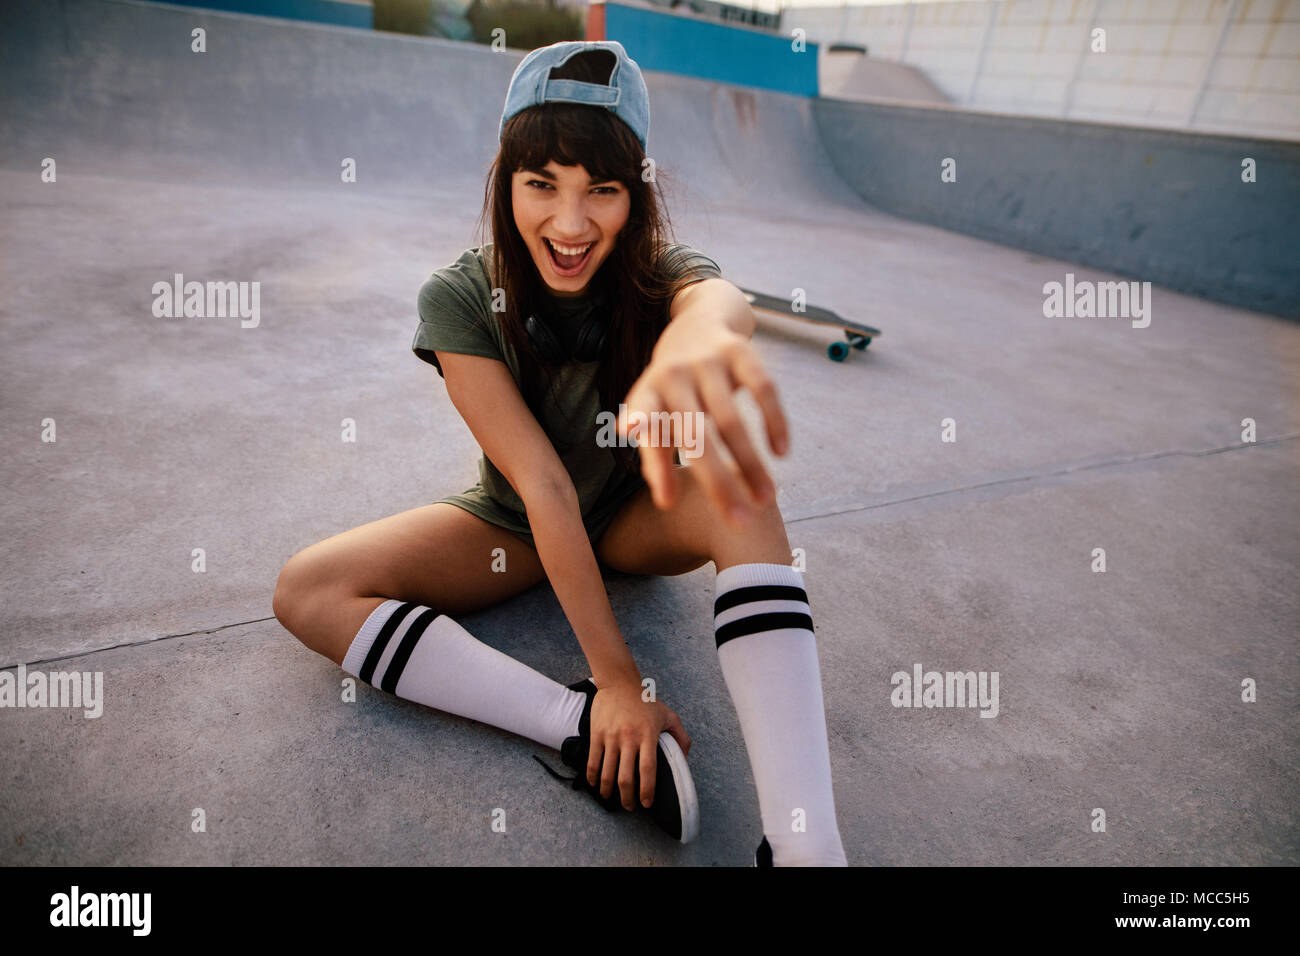 Laughing young skateboarder sitting at skate park et en montrant l'appareil photo. Cheerful woman outdoors at skate park s'amusant. Banque D'Images